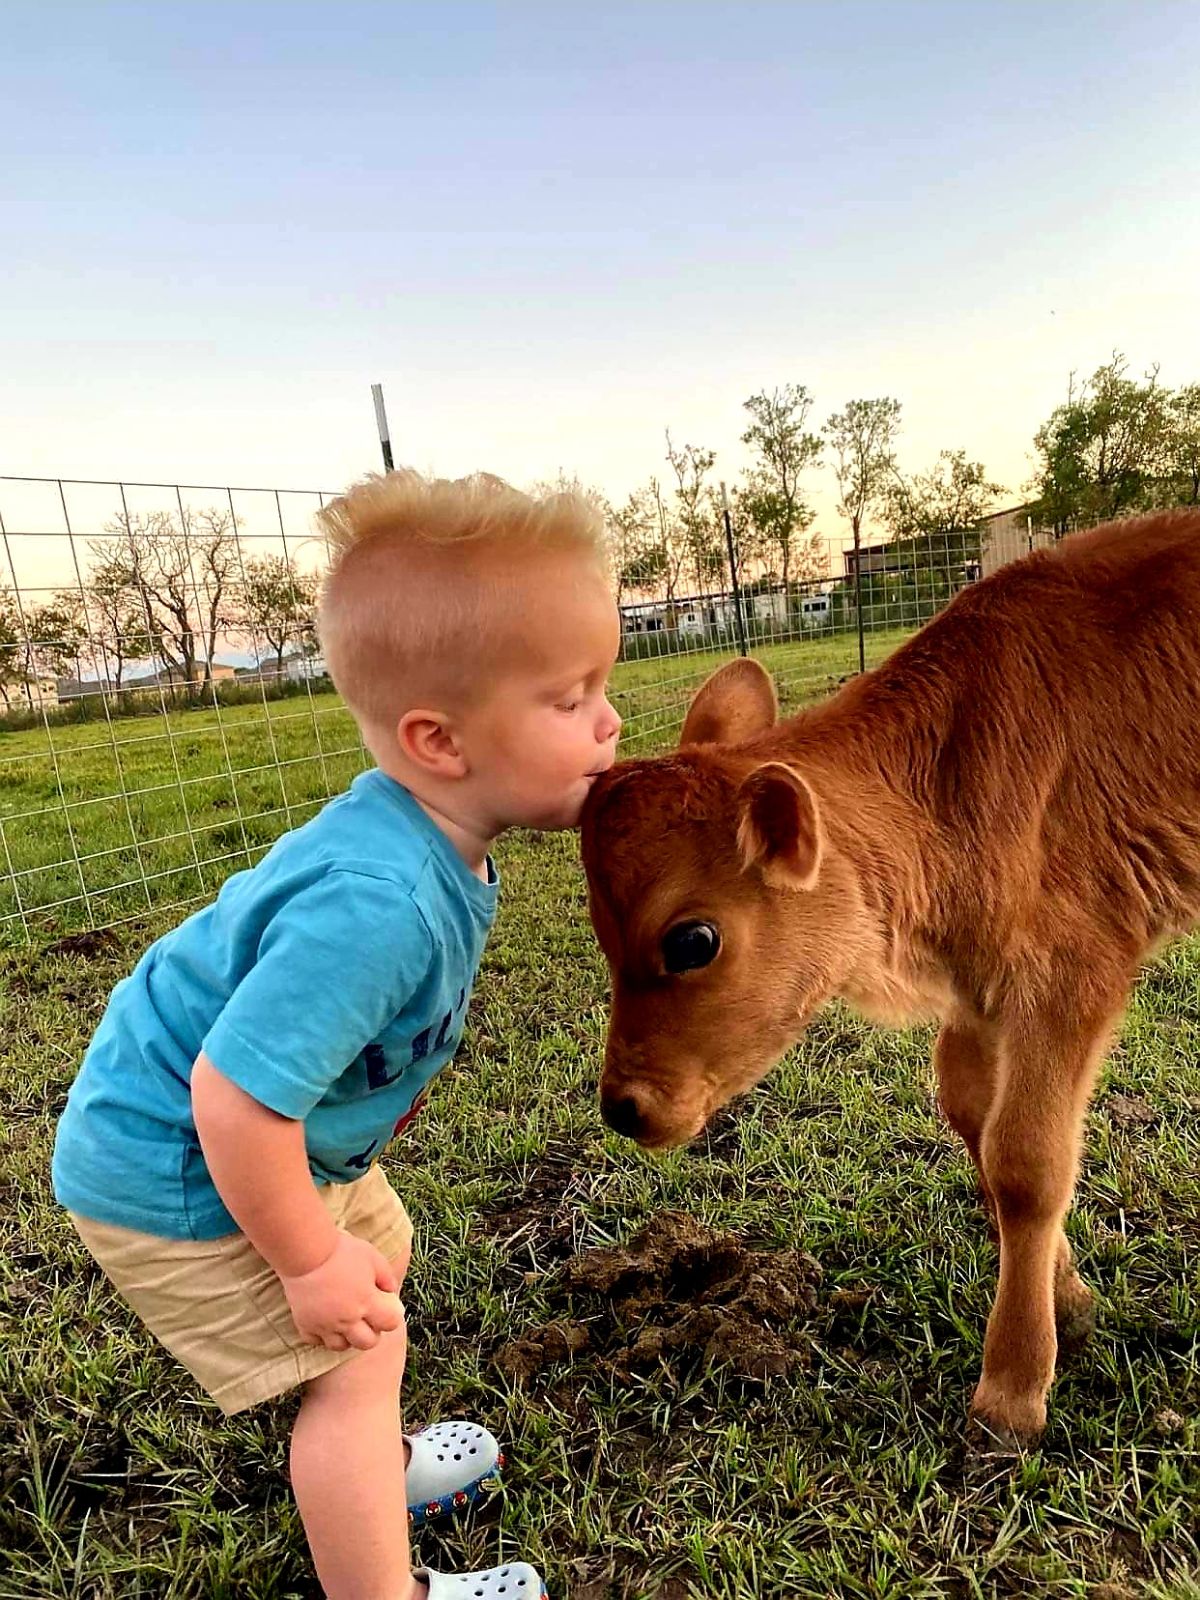 brown calf getting kissed on the head by a little boy